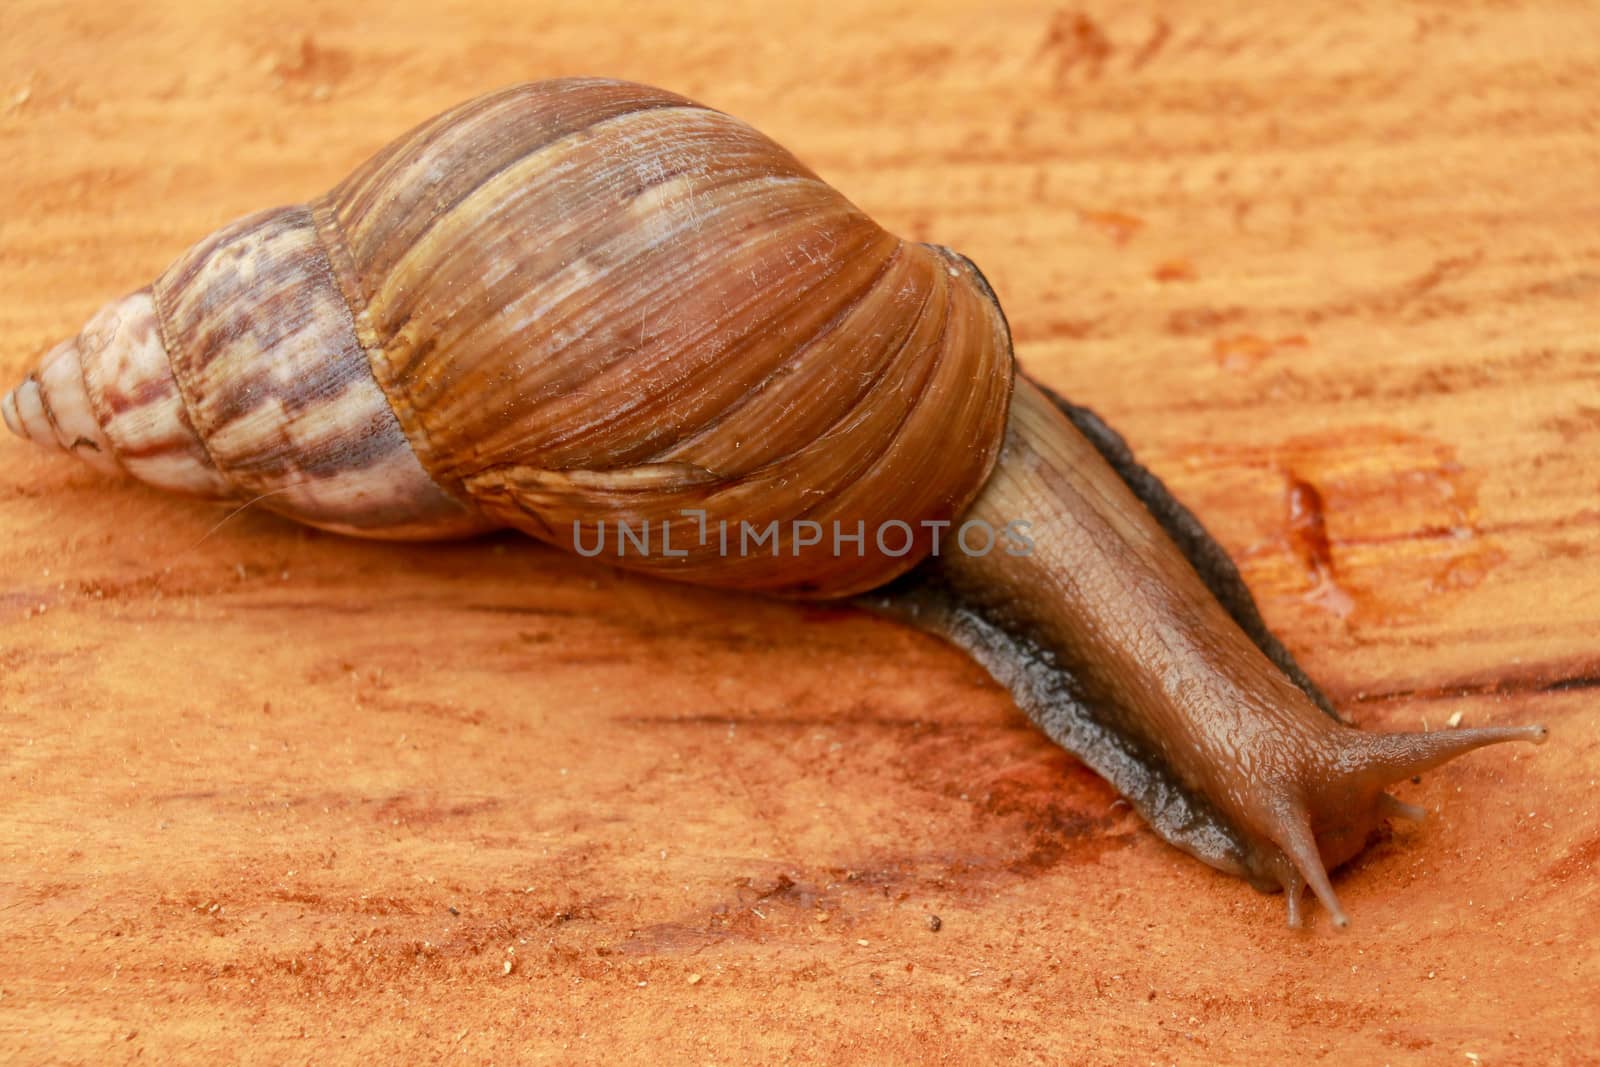 Top view of Snail Achatina fulica, African giant snail, Archachatina marginata with natural background. The Snail is on the wood.Beautiful patterned brown snail crawl on the wood surface. African snail shrugs by Sanatana2008